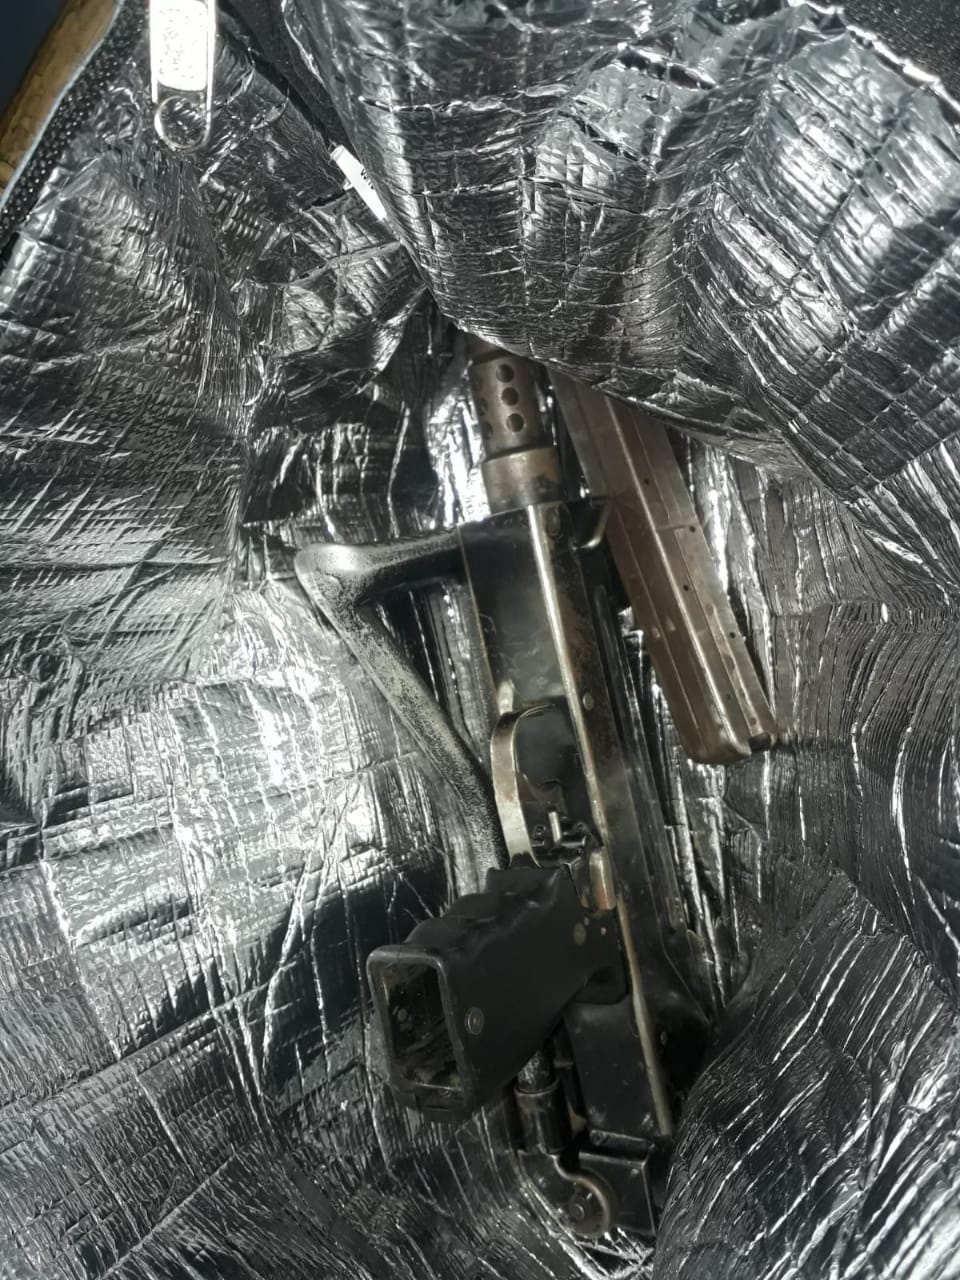 Four suspects arrested for possession of illegal firearms and dealing in drugs in Bonteheuwel and Ravensmead